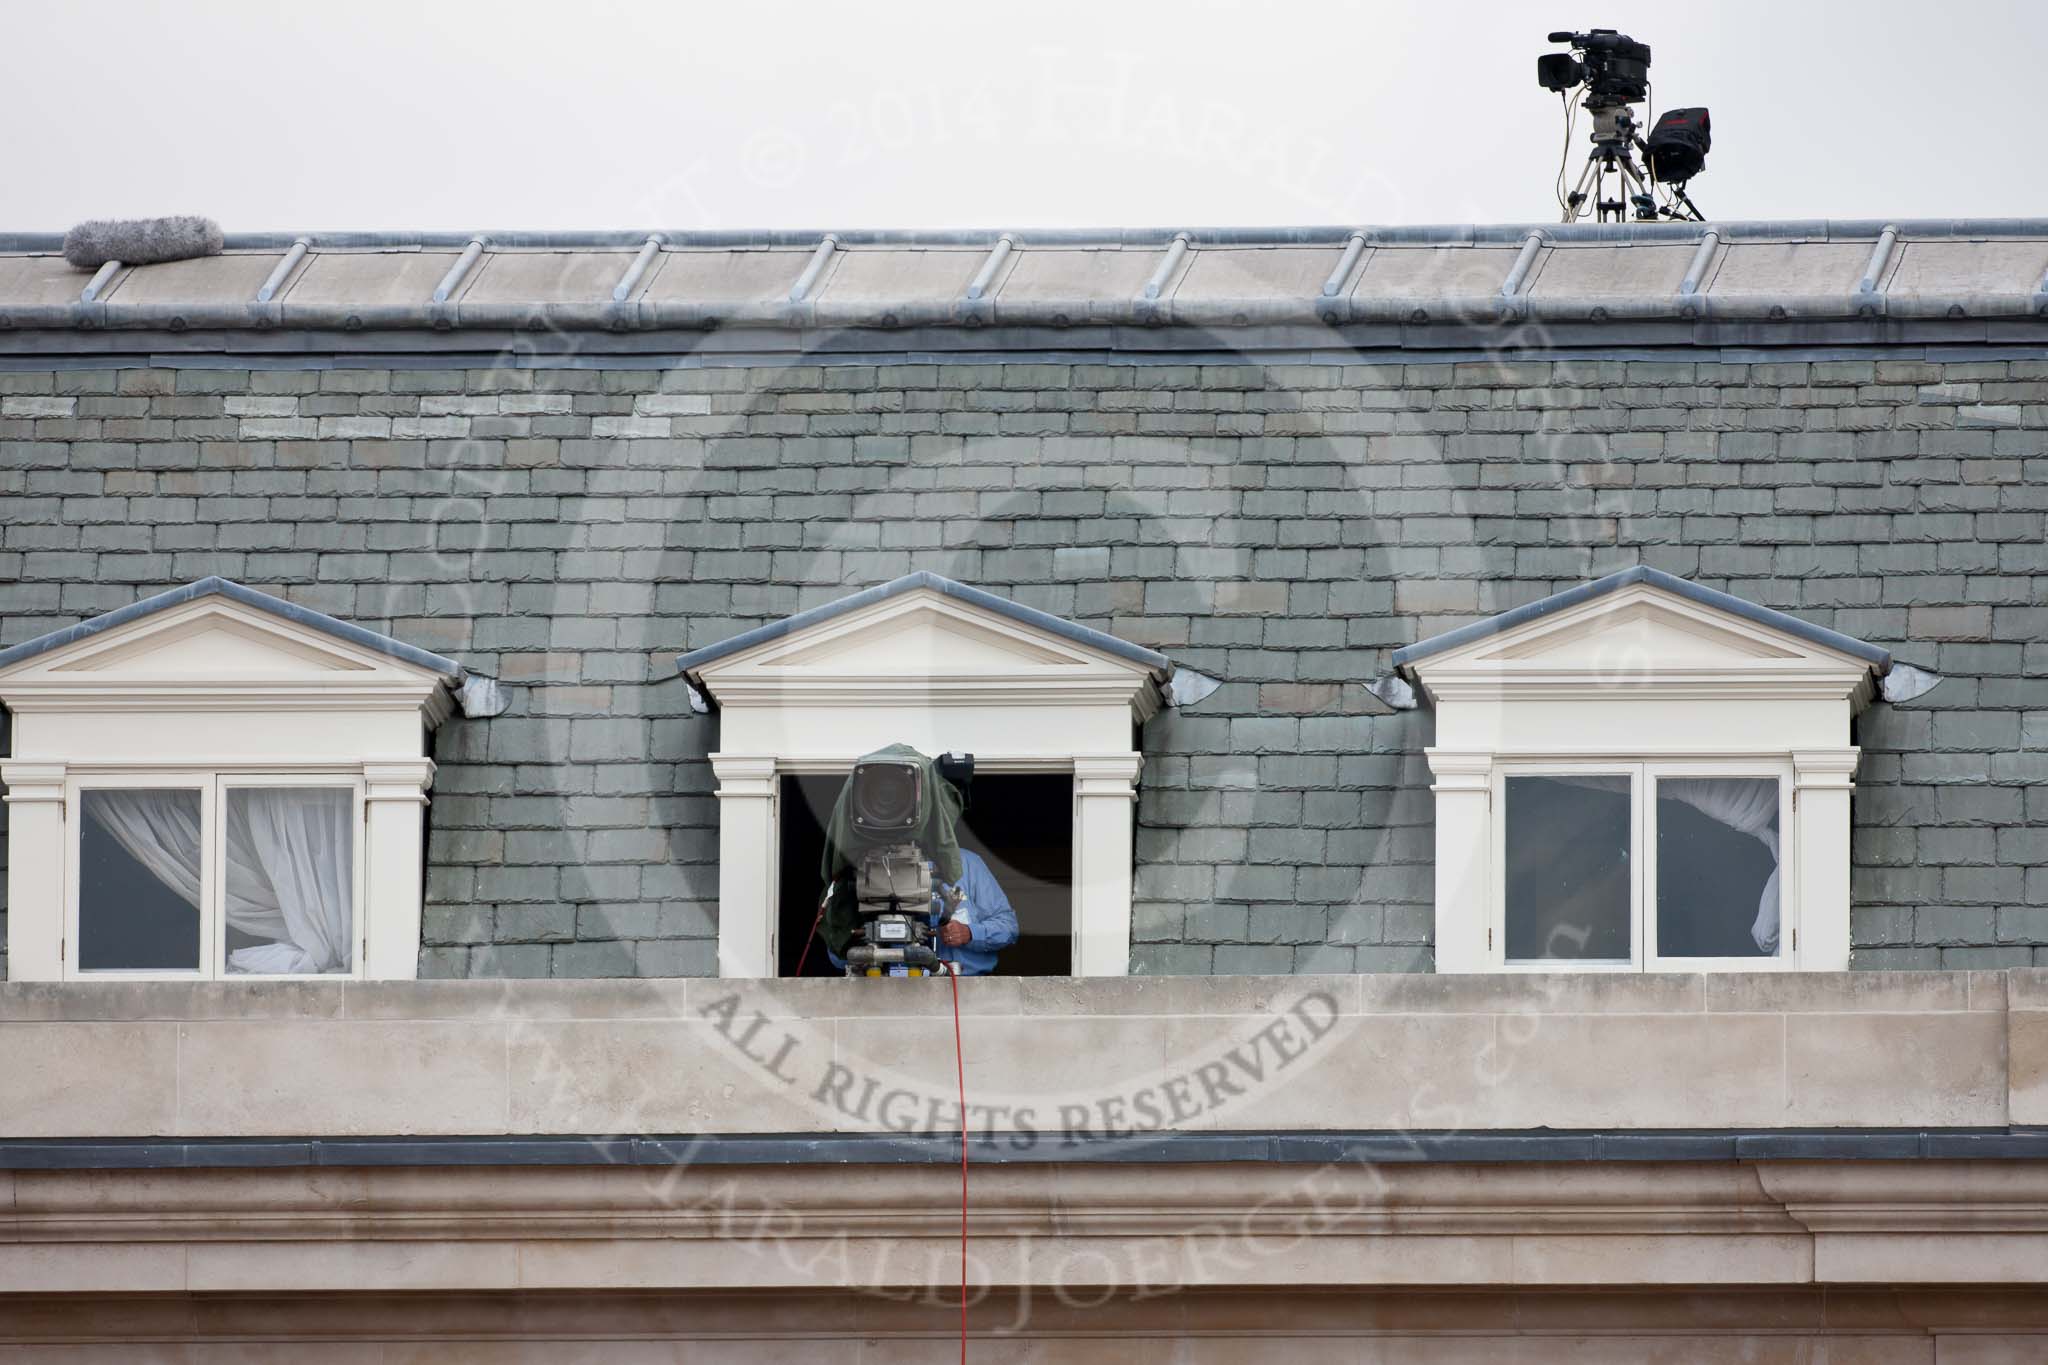 Trooping the Colour 2009: Another TV camara for the BBC, on the top floor of the Old Admirality Building, and police cameras on the roof..
Horse Guards Parade, Westminster,
London SW1,

United Kingdom,
on 13 June 2009 at 09:52, image #15